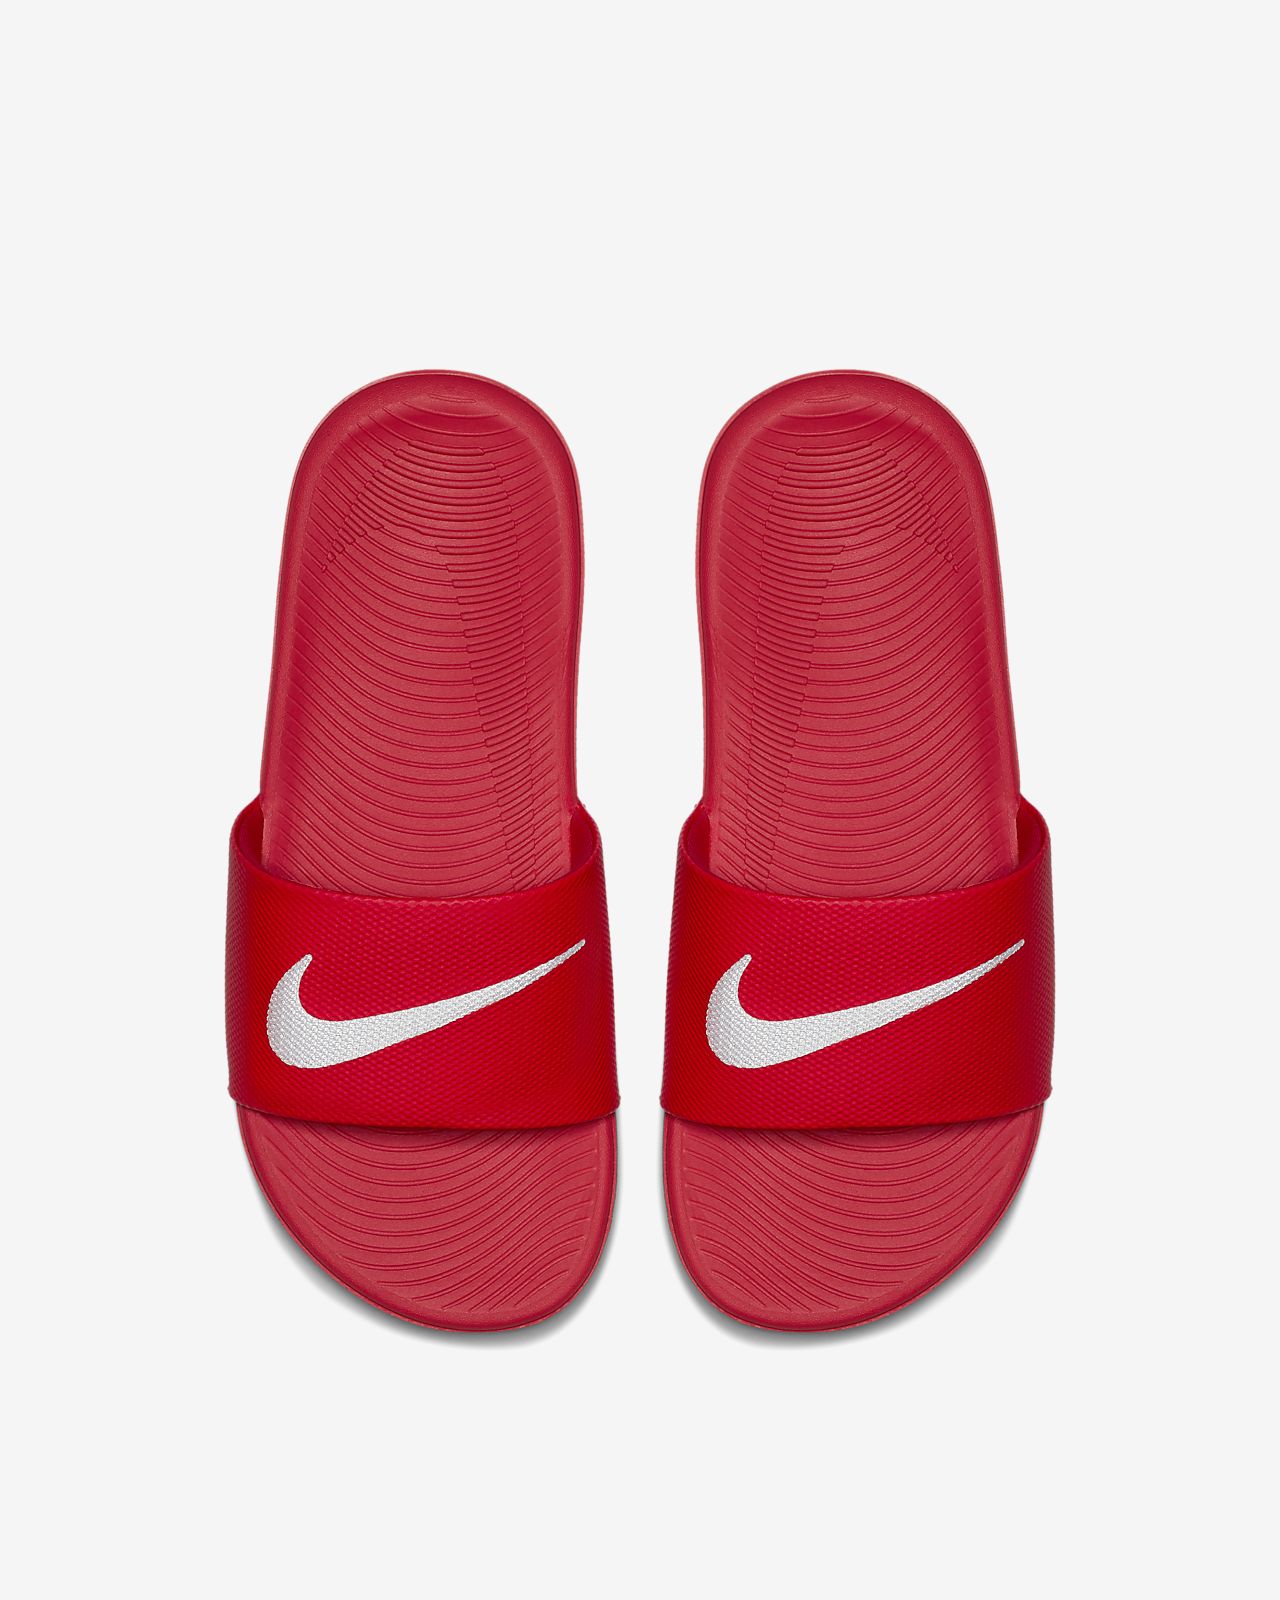 all red nike sandals